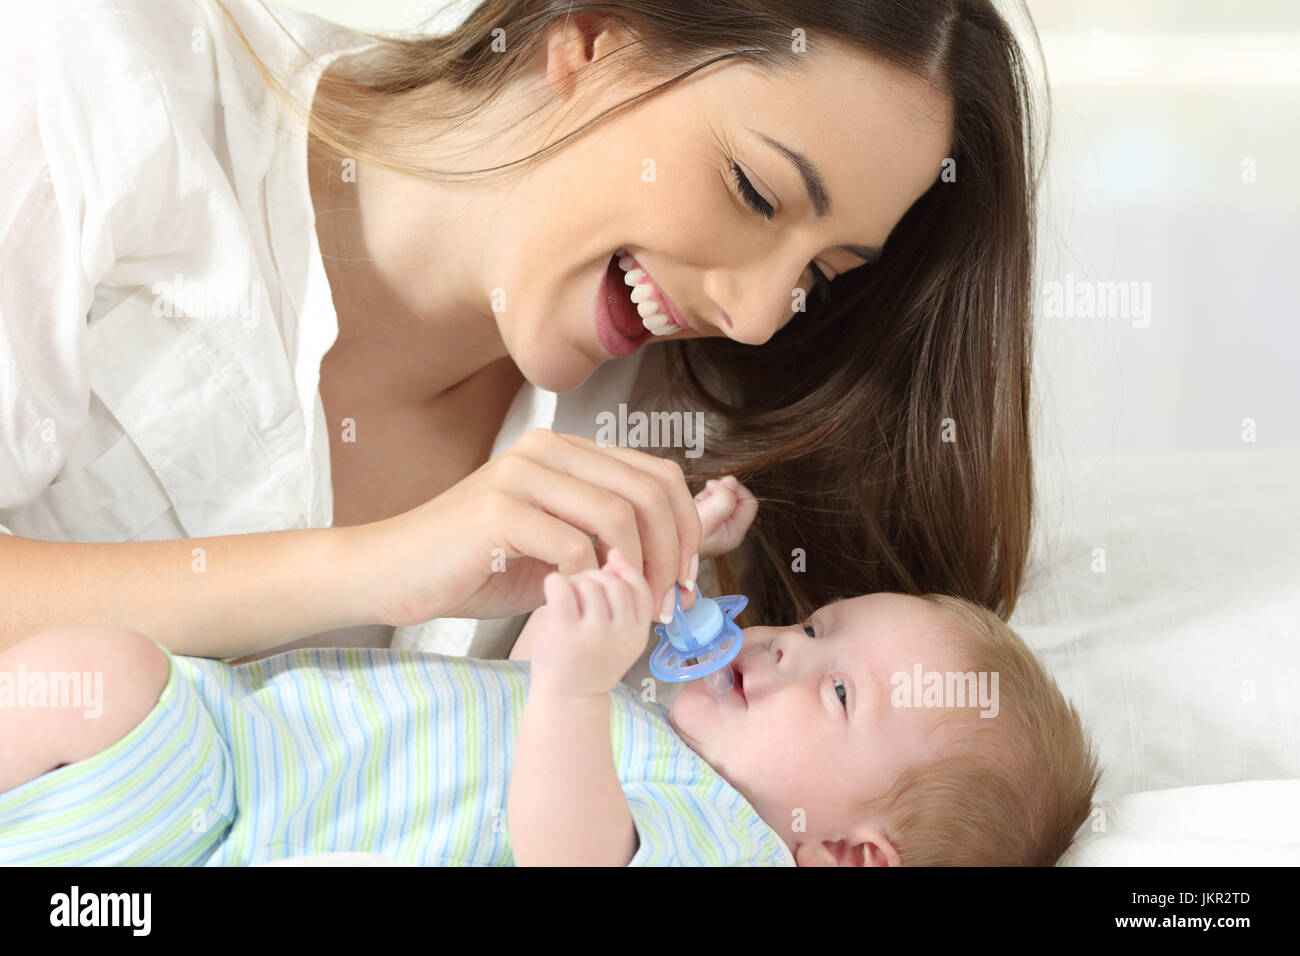 Happy mother giving a pacifier to her baby on a bed Stock Photo